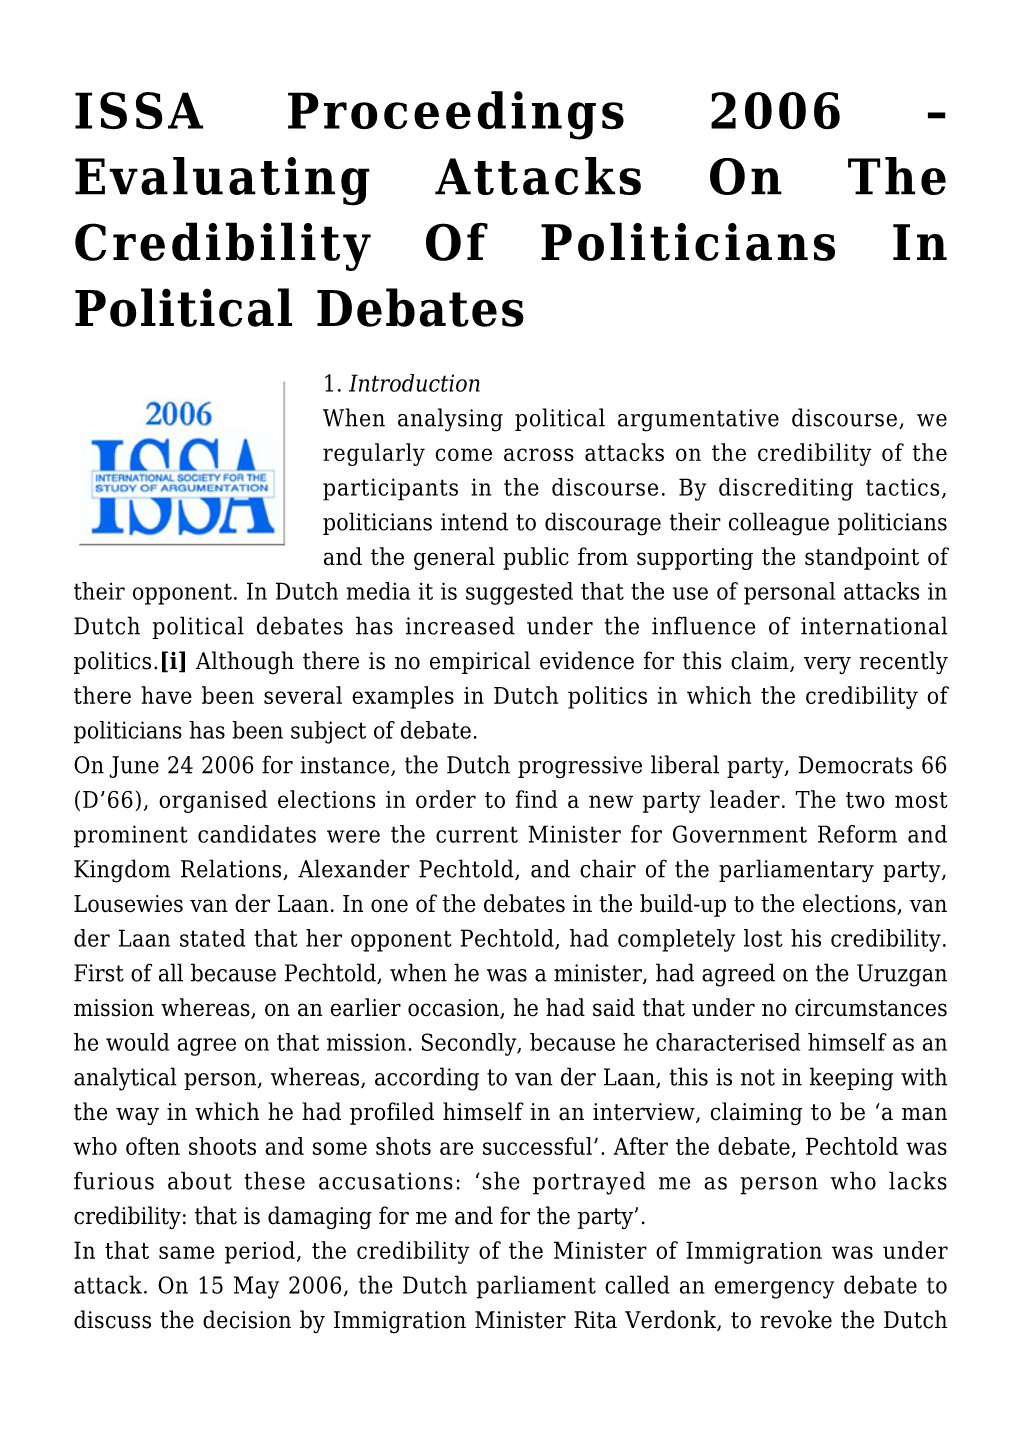 Evaluating Attacks on the Credibility of Politicians in Political Debates